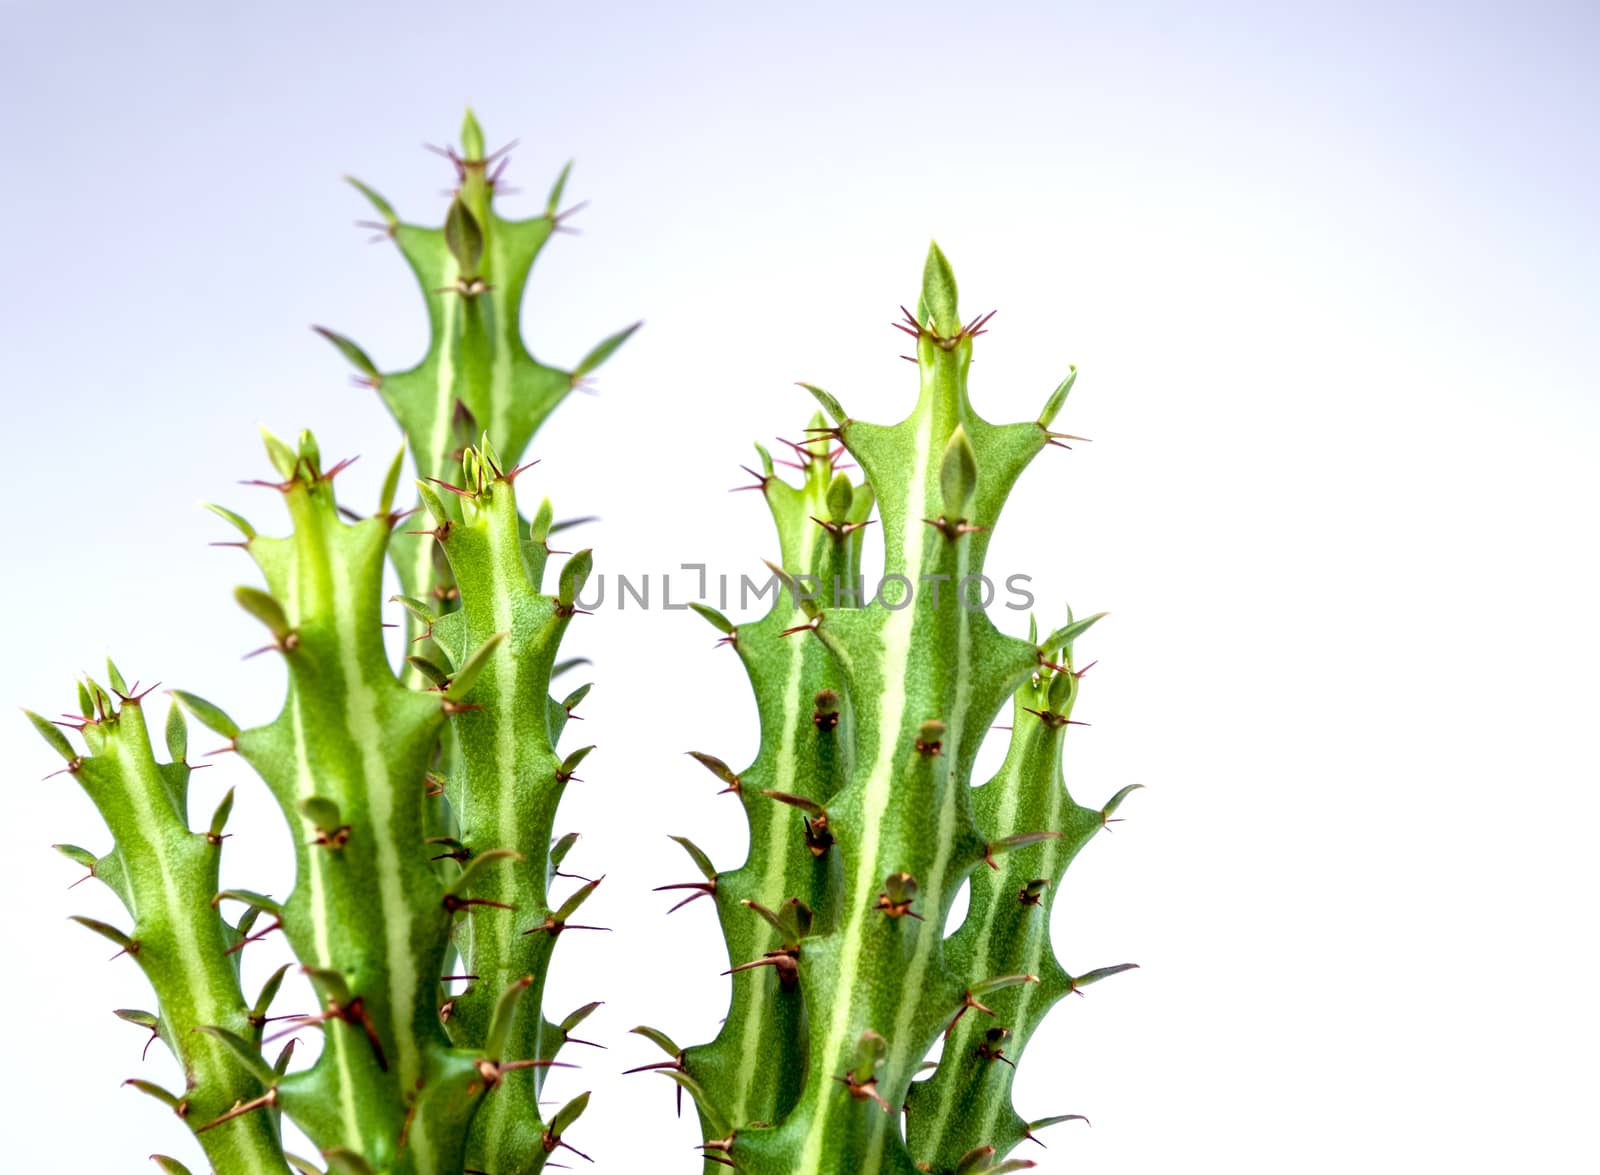 Succulent Euphorbia knuthii cactus on the white background, houseplant for room decoration